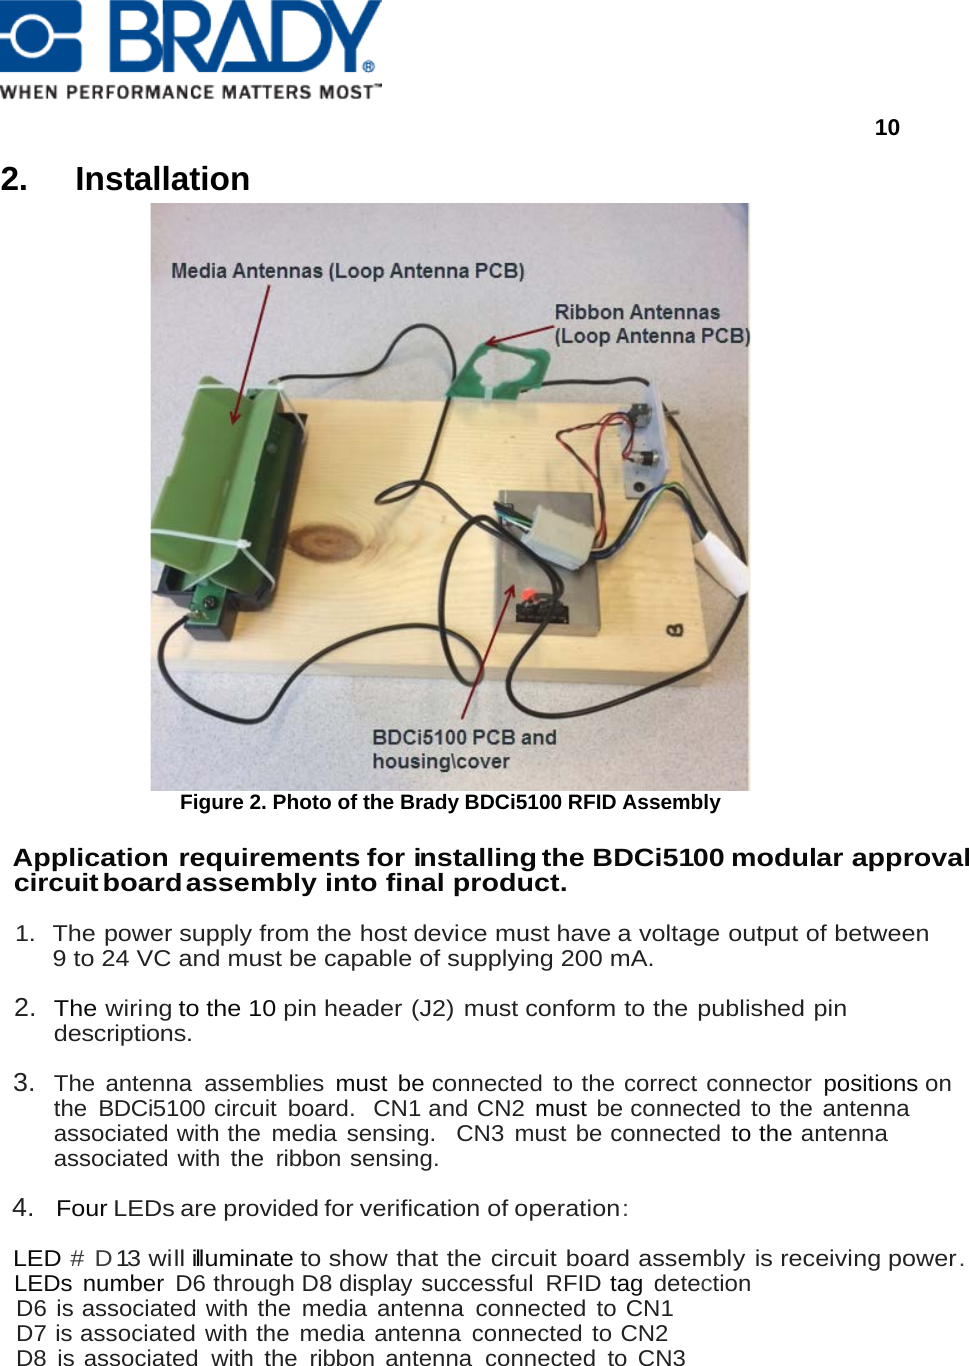      10  2. Installation  Figure 2. Photo of the Brady BDCi5100 RFID Assembly  Application requirements for installing the BDCi5100 modular approval circuit board assembly into final product.  1. The power supply from the host device must have a voltage output of between  9 to 24 VC and must be capable of supplying 200 mA.  2. The wiring to the 10 pin header (J2) must conform to the published pin       descriptions.  3. The antenna assemblies must be connected to the correct connector positions on  the BDCi5100 circuit  board.  CN1 and CN2 must be connected to the antenna associated with the media sensing.  CN3 must be connected to the antenna associated with the ribbon sensing.  4. Four LEDs are provided for verification of operation :  LED # D13 will illuminate to show that the circuit board assembly is receiving power. LEDs number D6 through D8 display successful  RFID tag detection  D6 is associated with the media antenna connected to CN1 D7 is associated with the media antenna connected to CN2 D8 is associated with the ribbon antenna connected to CN3 